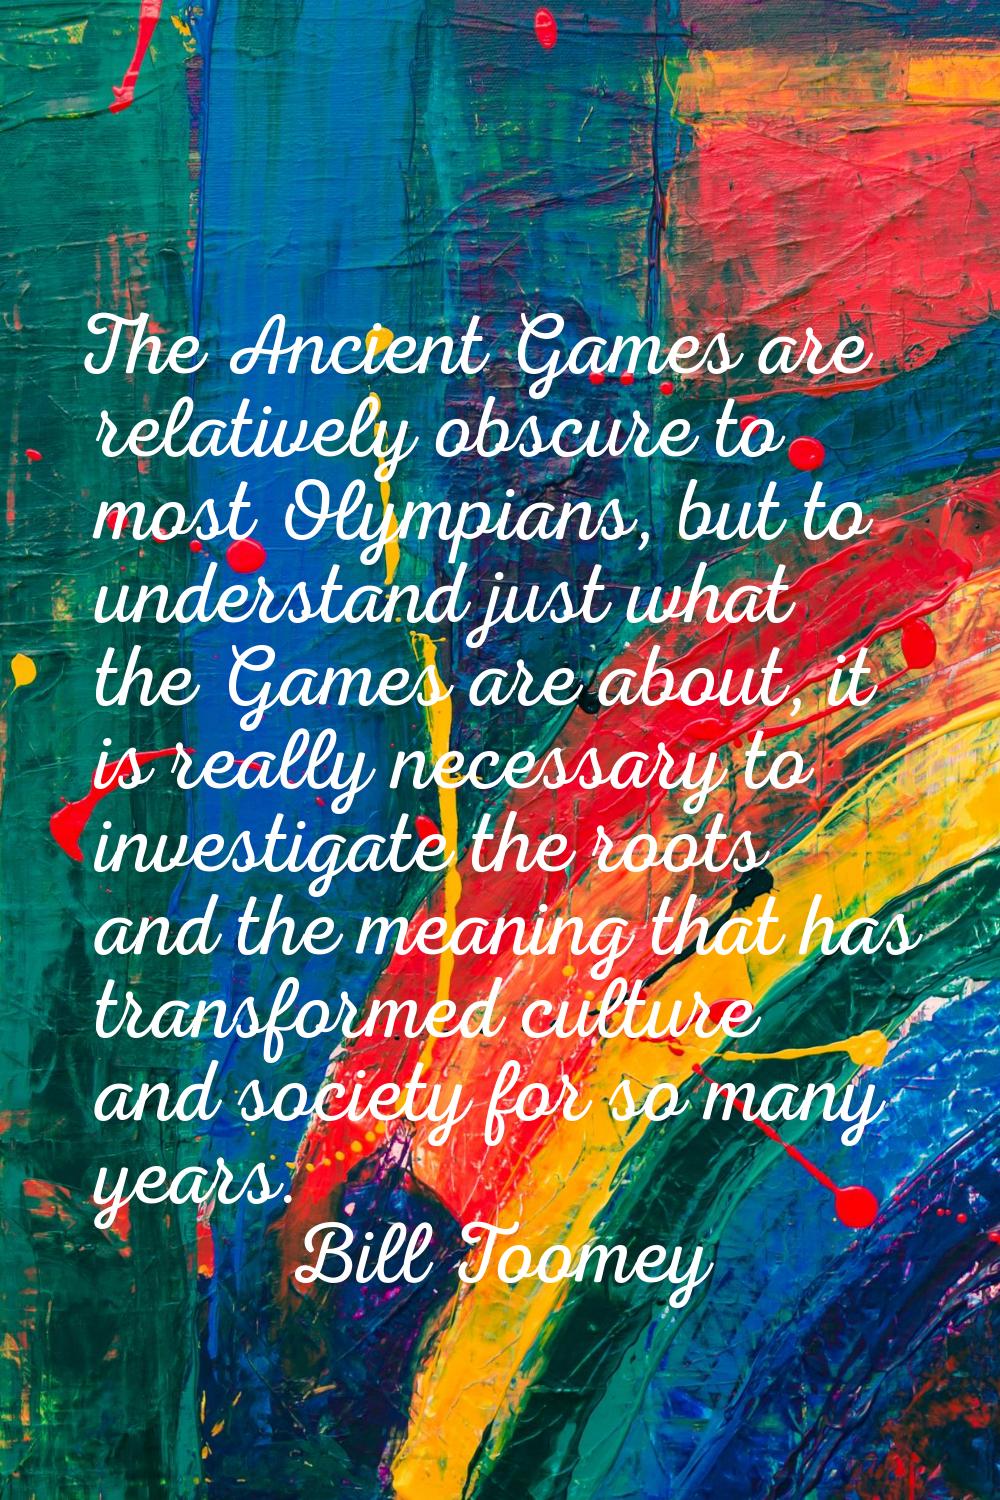 The Ancient Games are relatively obscure to most Olympians, but to understand just what the Games a